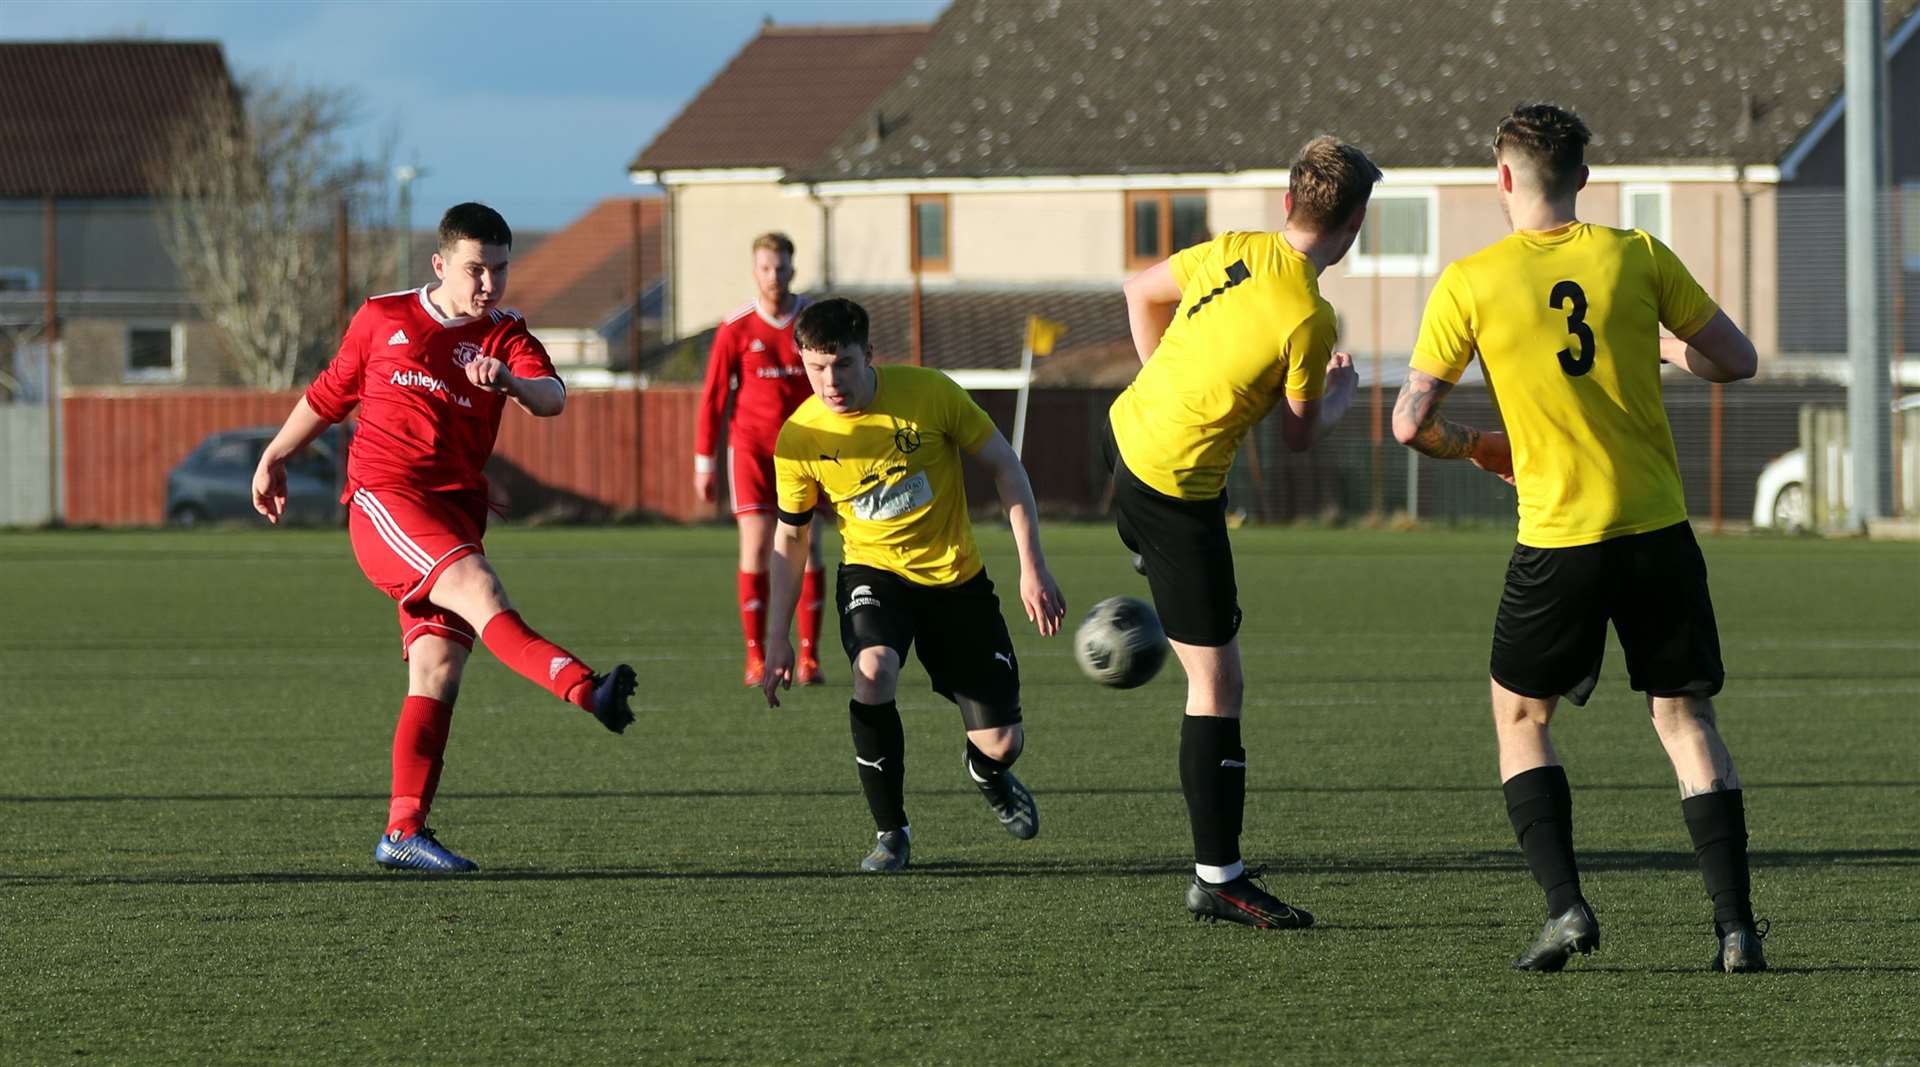 Jack McKechnie attempts a shot during Thurso's North Caledonian Cup quarter-final against County Nairn 'A' in Naver last month.  County won on penalties that day and the Vikings will be out for revenge when the teams meet again in the league this weekend.  Photo: James Gunn